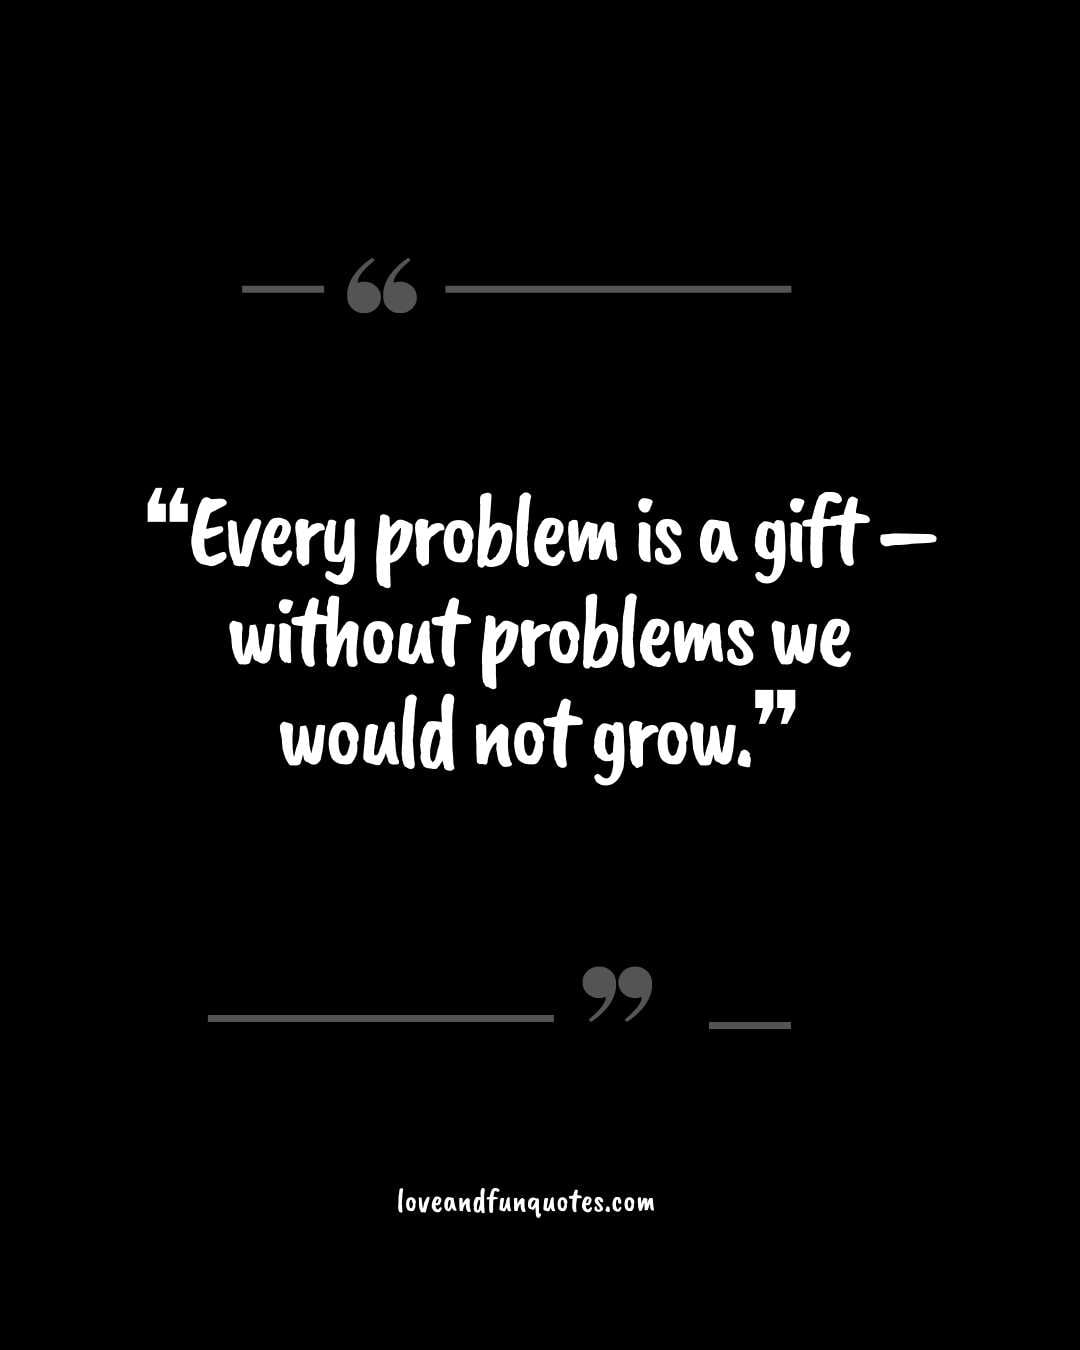 ❝Every problem is a gift – without problems we would not grow.❞